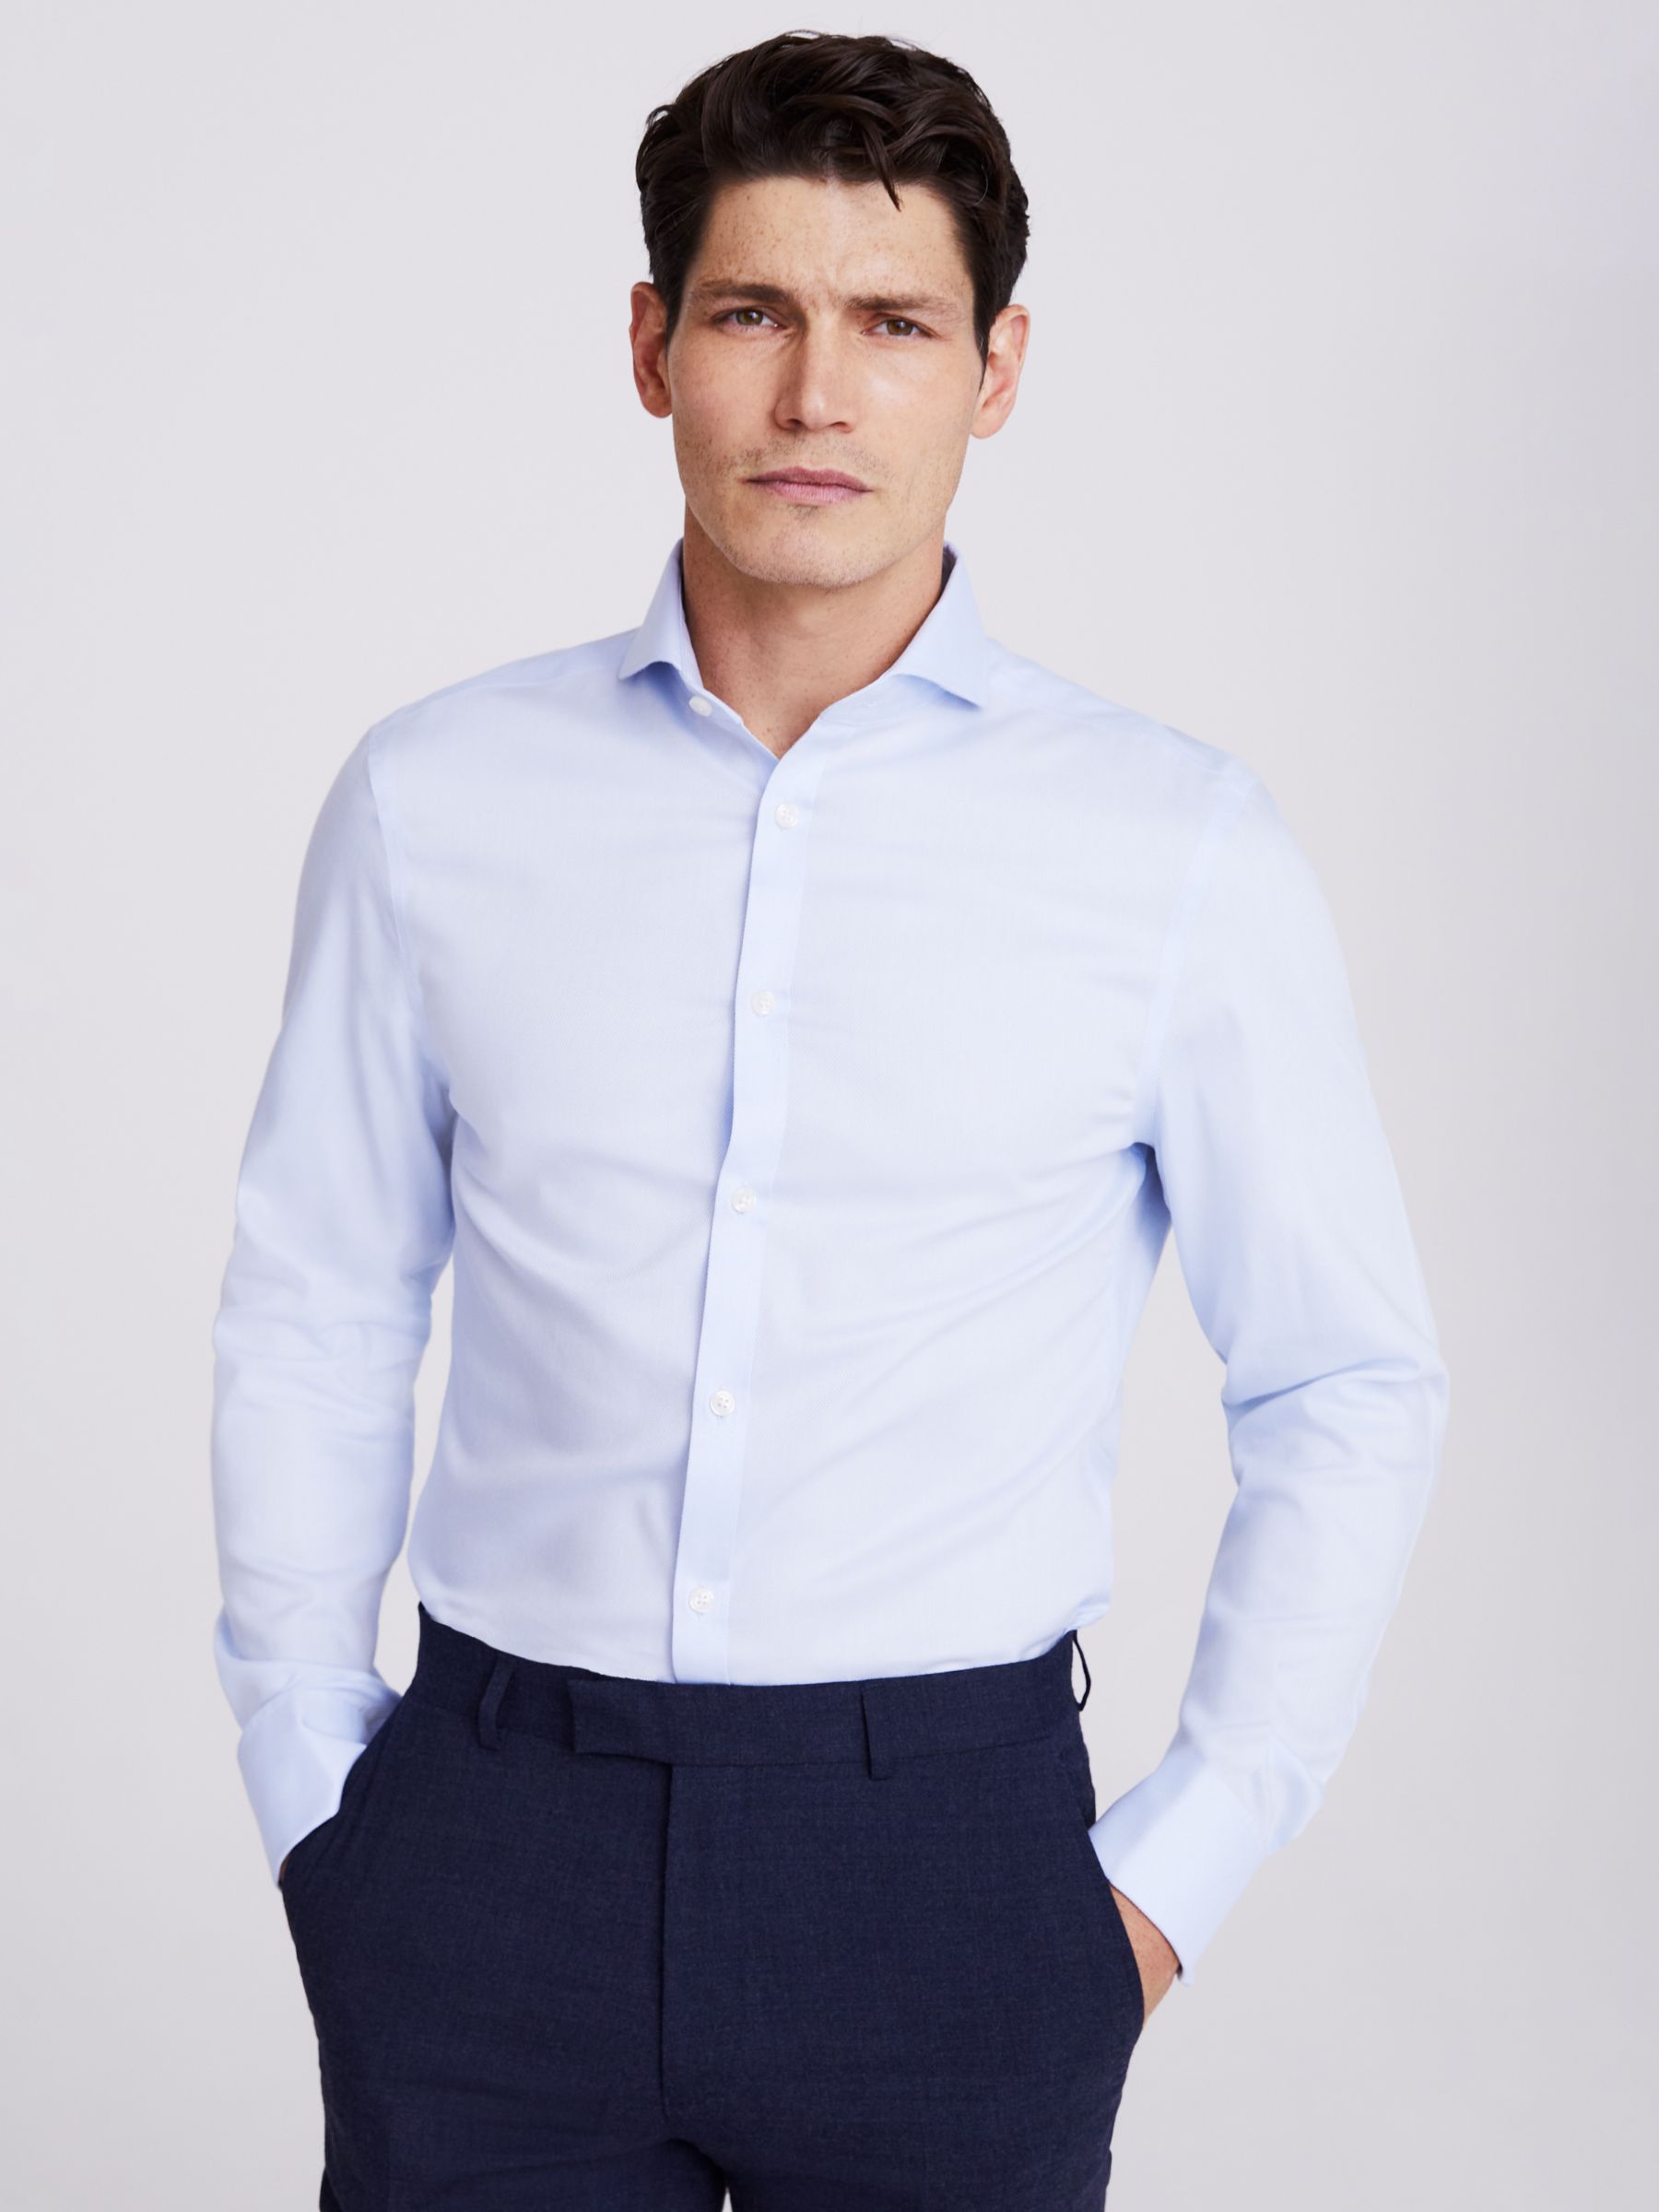 Moss Slim Fit Royal Oxford Non-Iron Double Cuff Shirt, Blue, 14